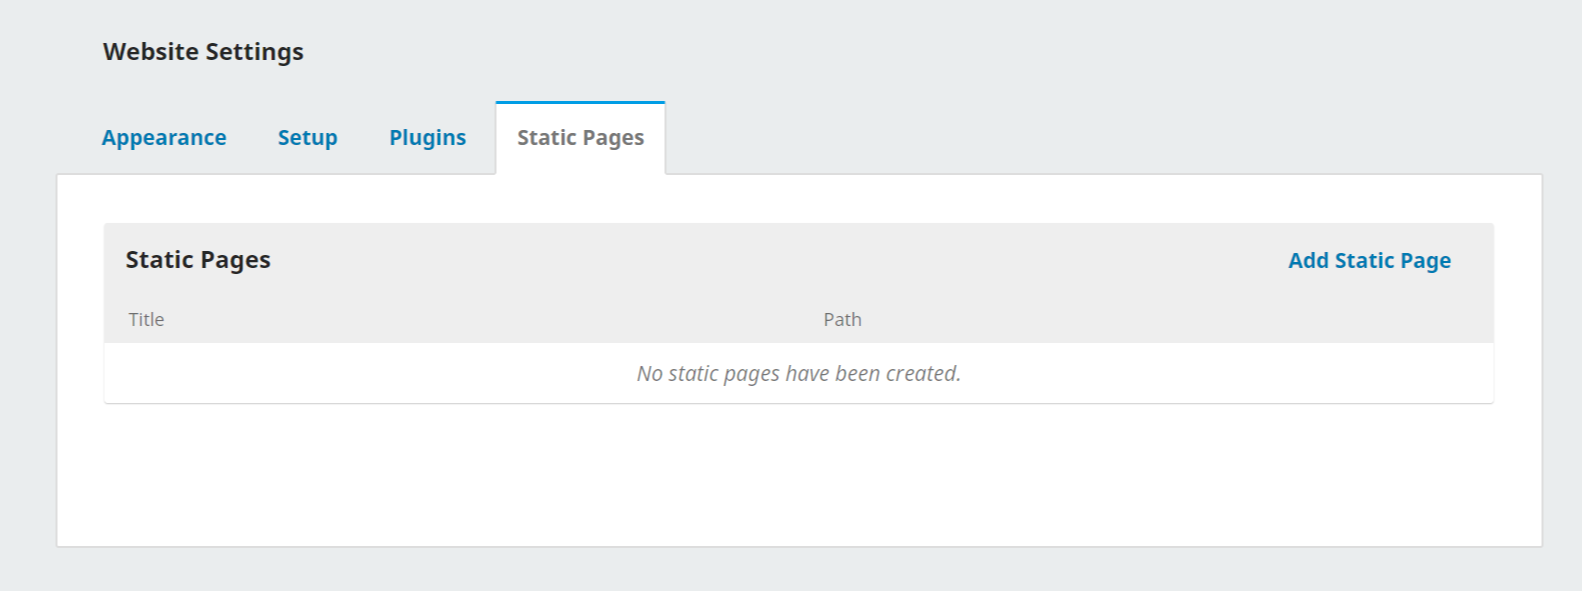 Static Pages tab in the Website Settings menu.